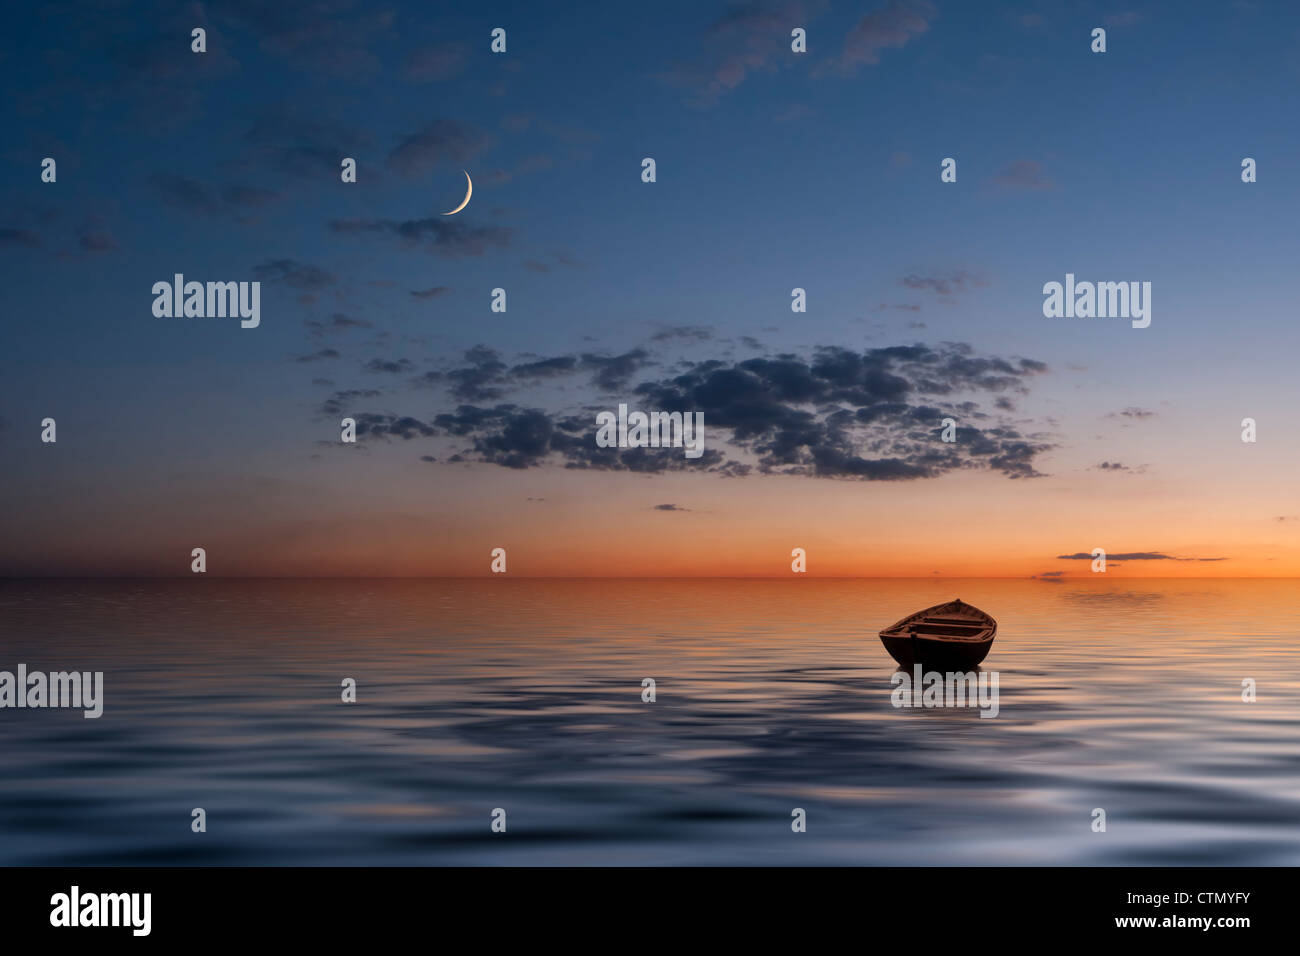 The lonely old boat at the ocean, evenig sky with moon and clouds on background Stock Photo